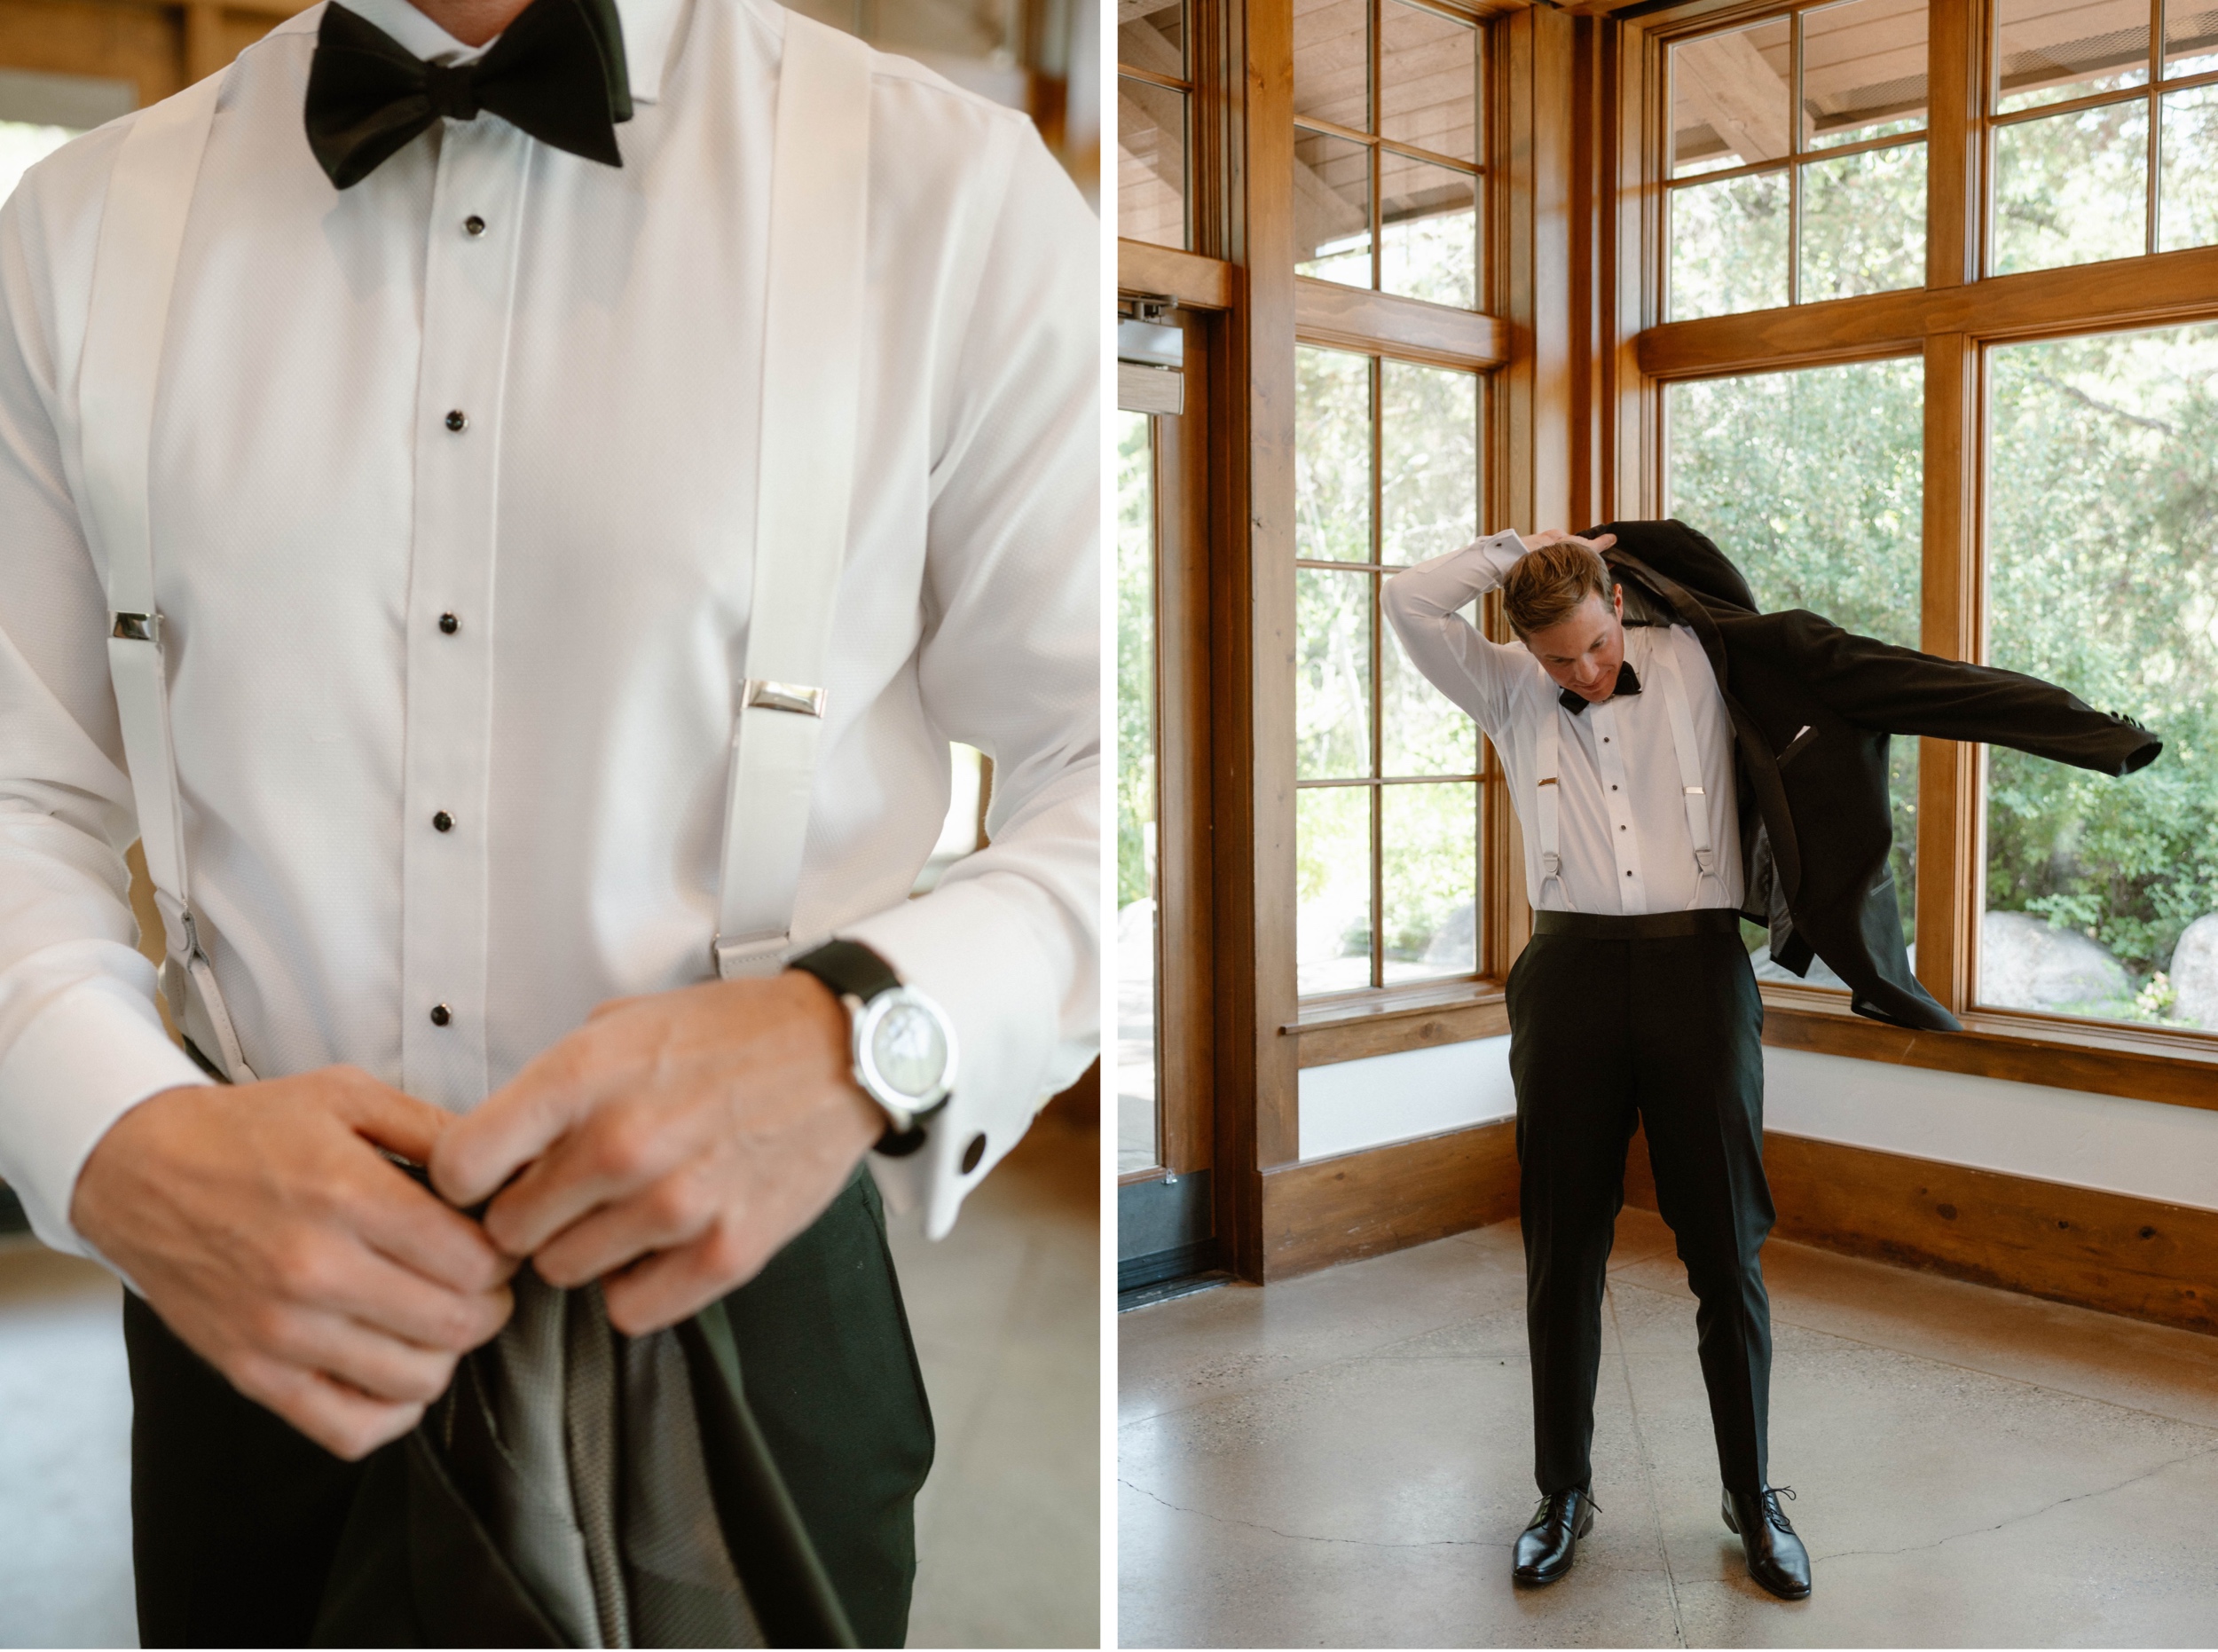 A groom getting ready for his wedding at Donovan Pavilion in Vail, Colorado. Photo by Colorado wedding photographer, Ashley Joyce.